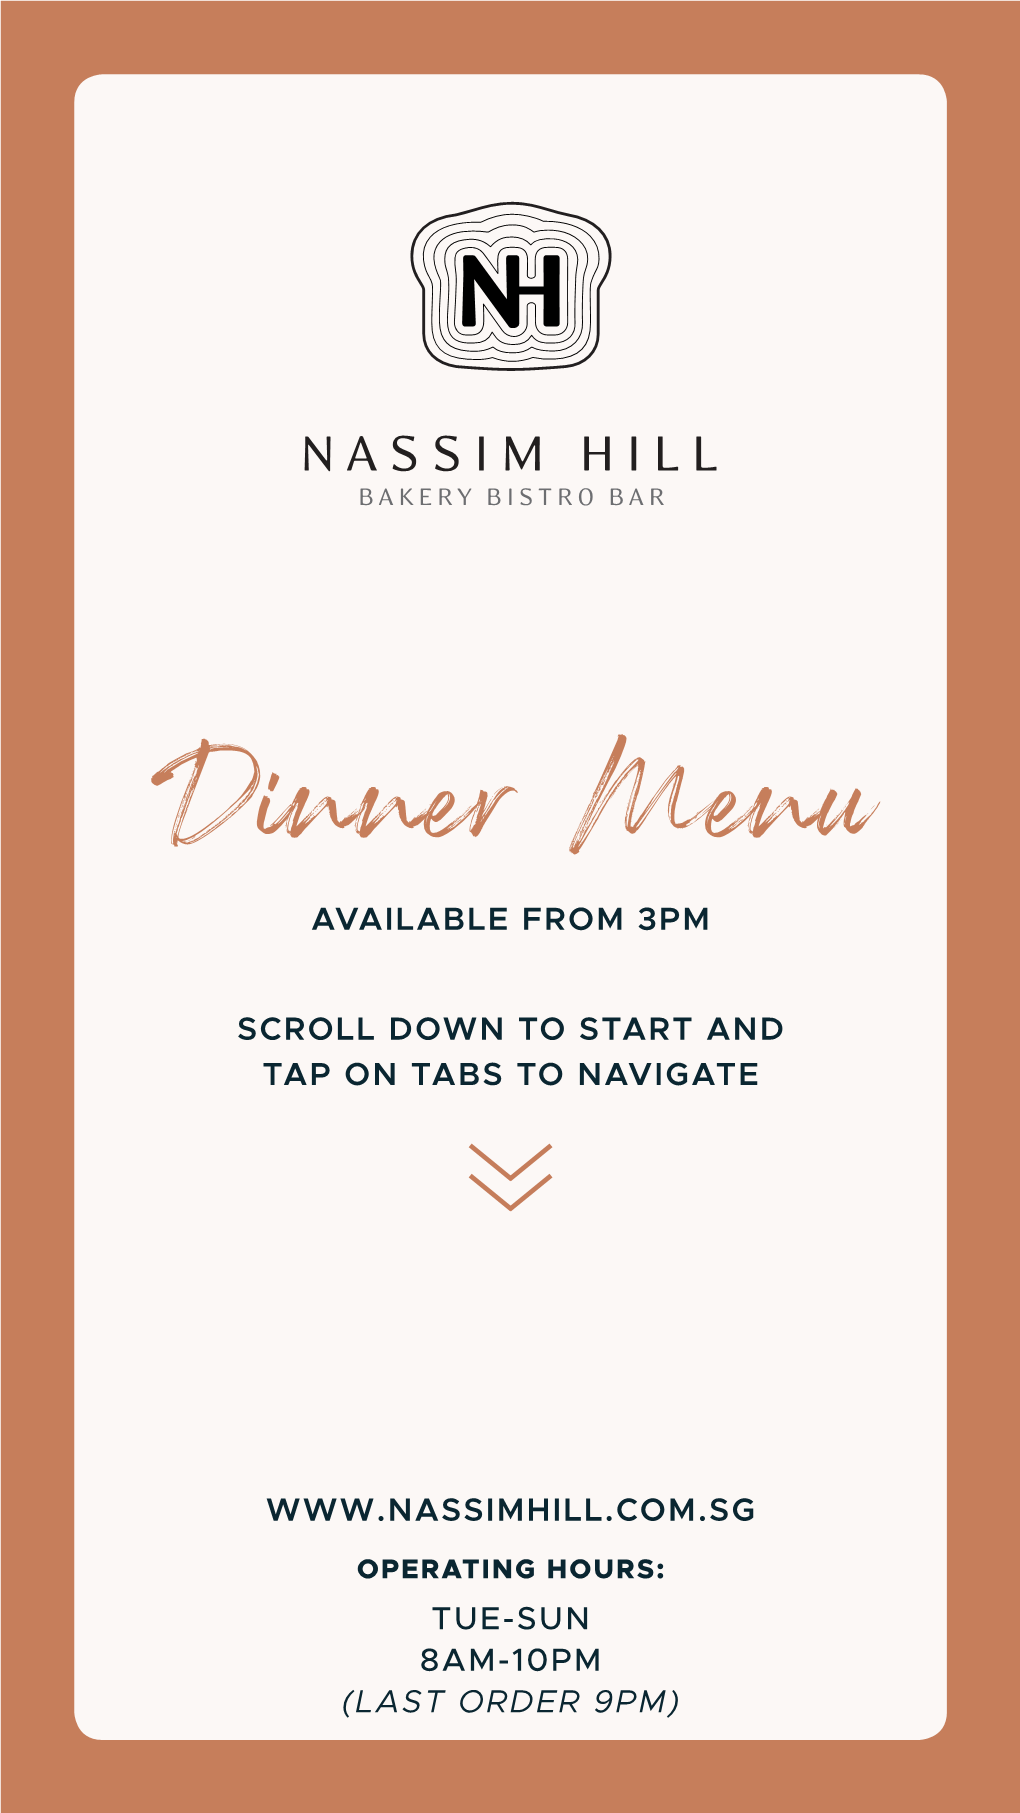 Dinner Menu AVAILABLE from 3PM